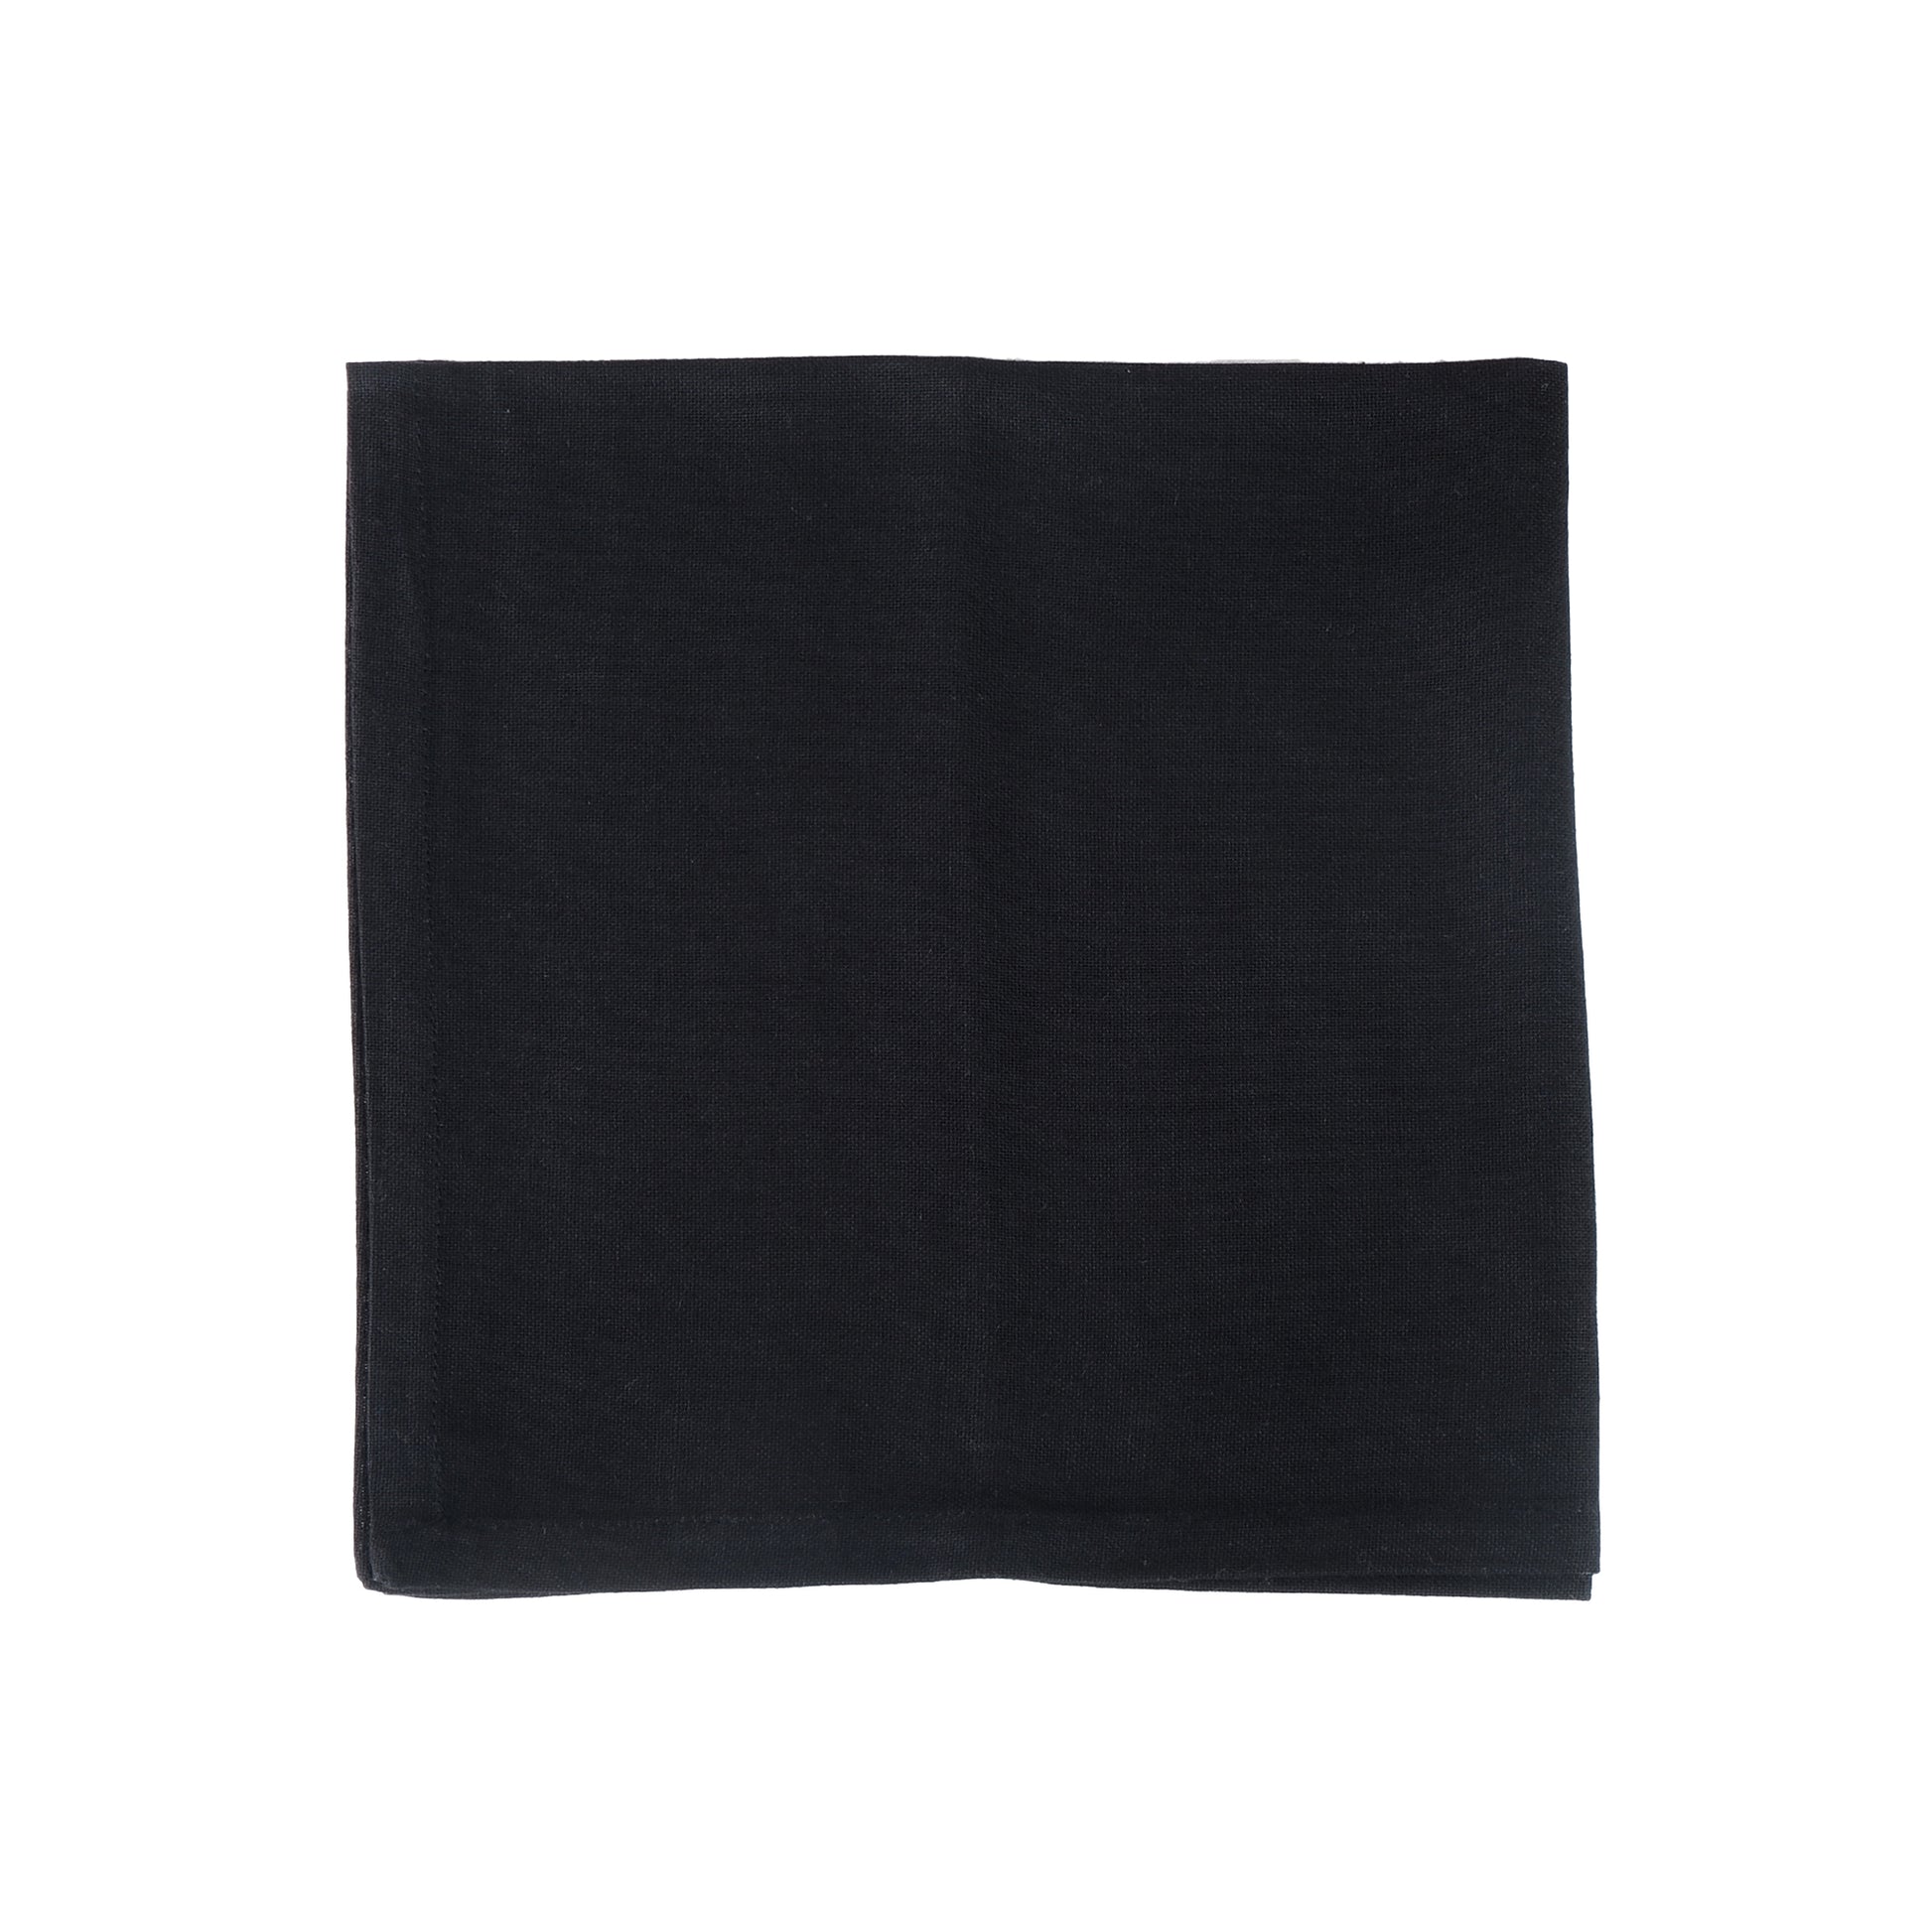 Hausattire Cloth Napkins Set of 12 (18x18 inches) Black - Cotton Reusable Dinner Napkins - Durable and Perfect for Everyday Use